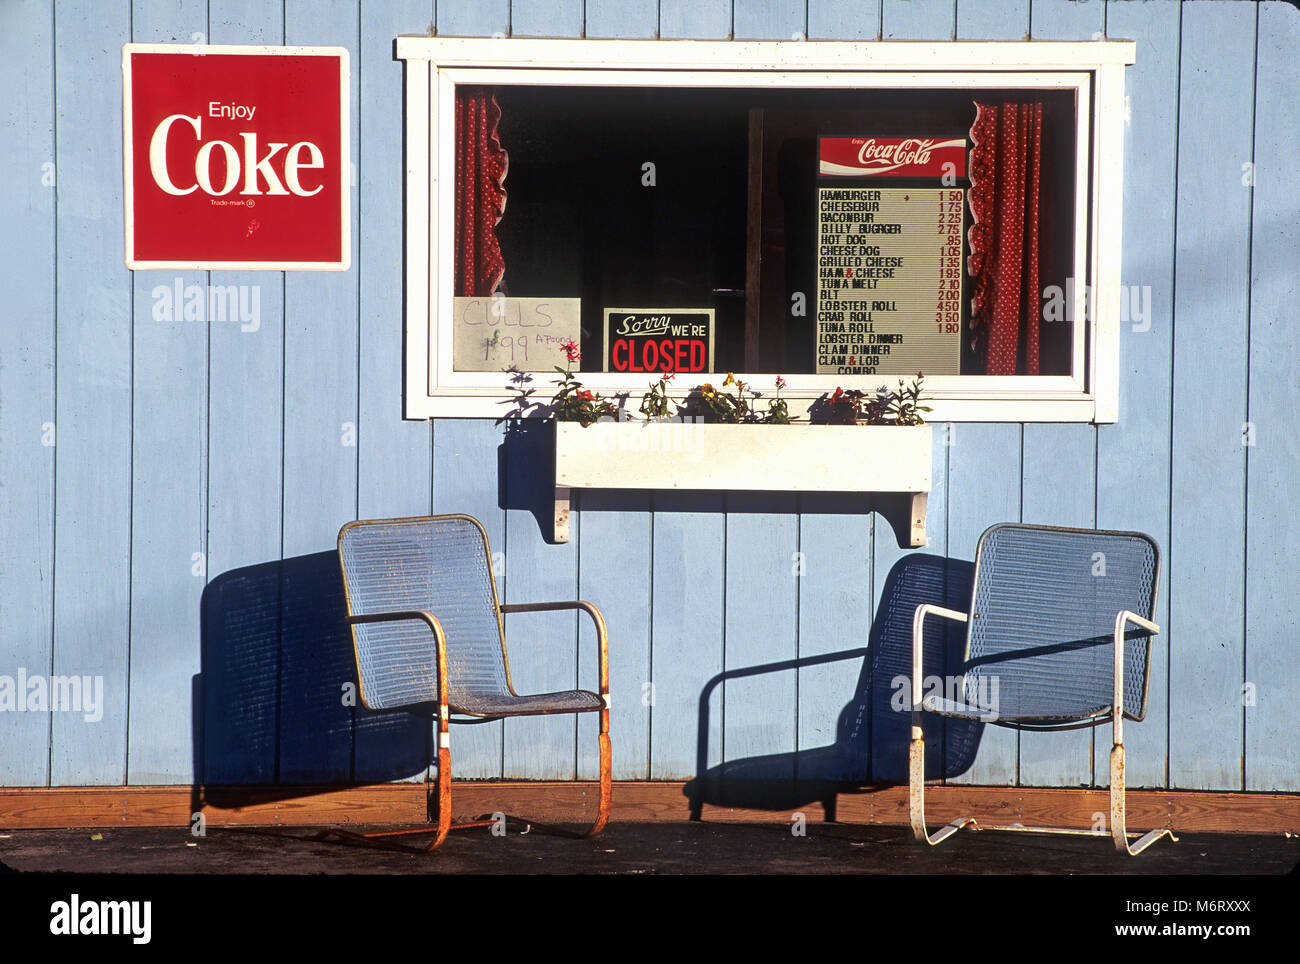 A snack shack along the coast of maine with prices of the past. Stock Photo